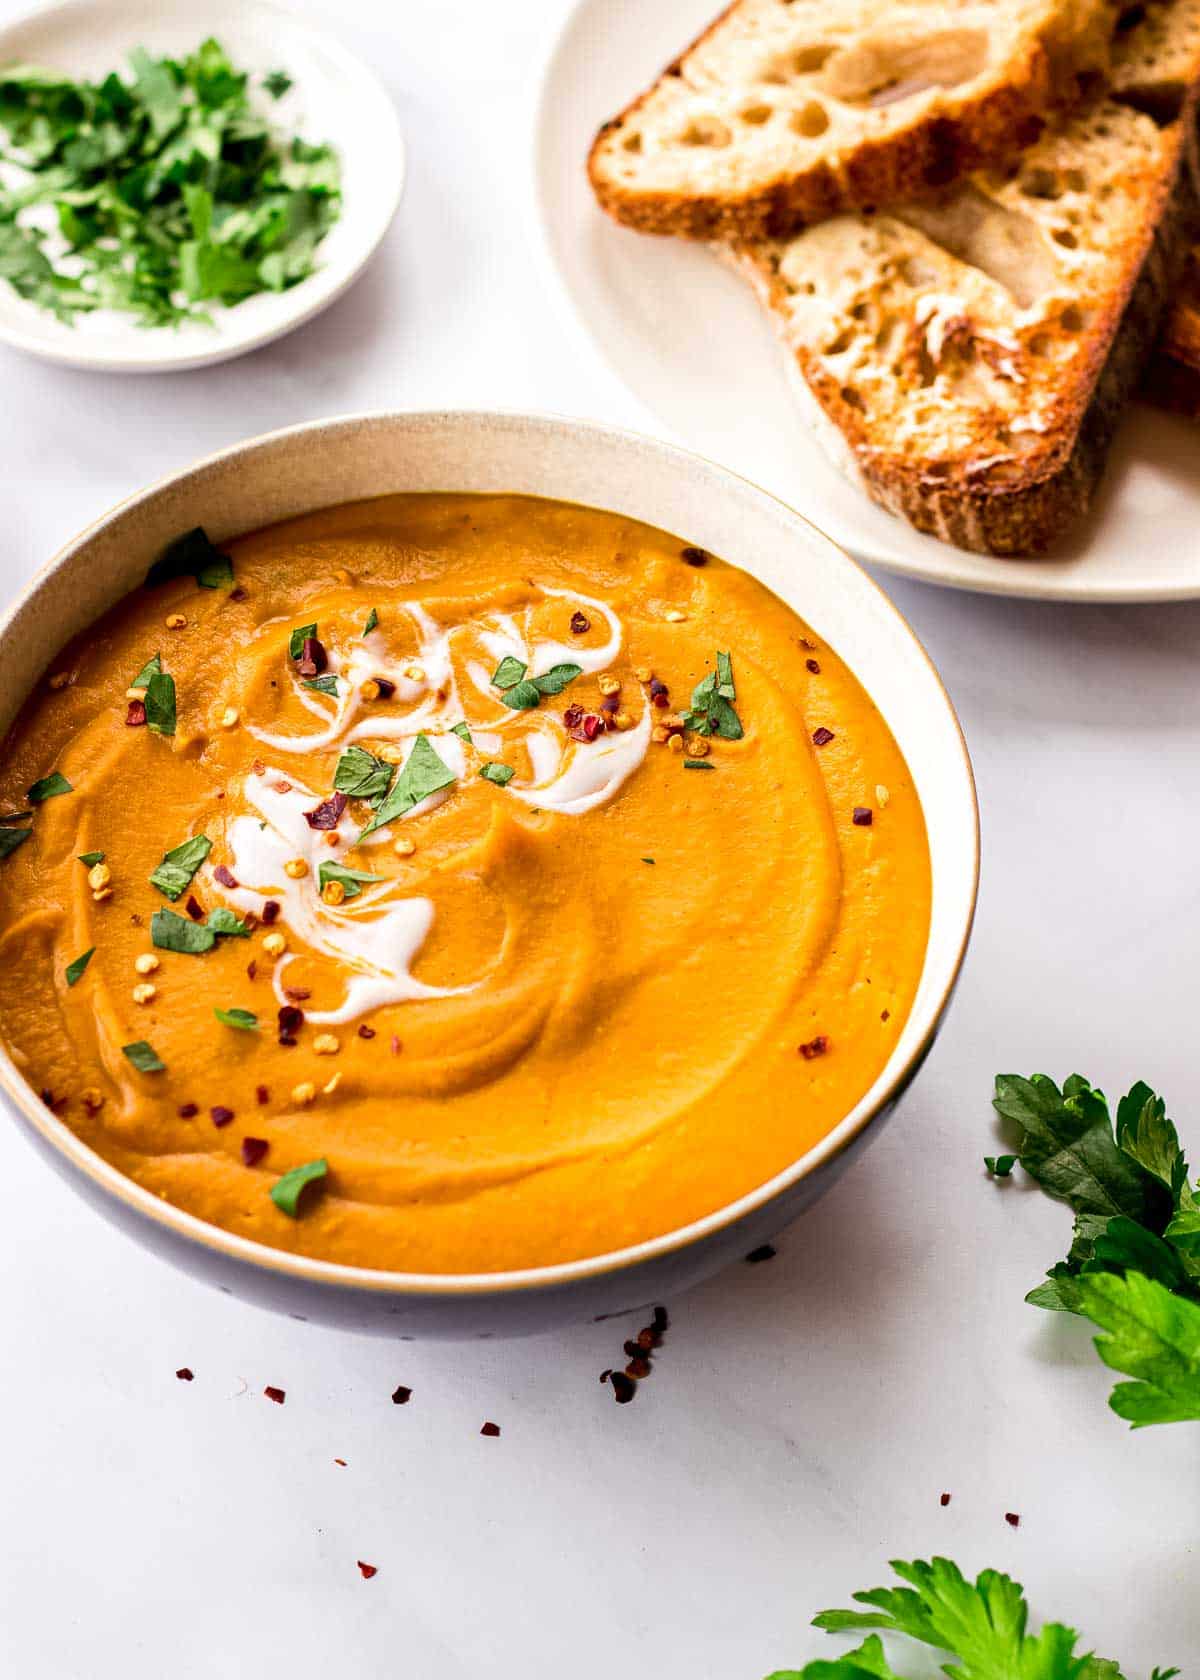 A bowl of lentil and carrot soup deorated with coconut yoghurt, parsley and chili flakes surrounded by bread and parsley.